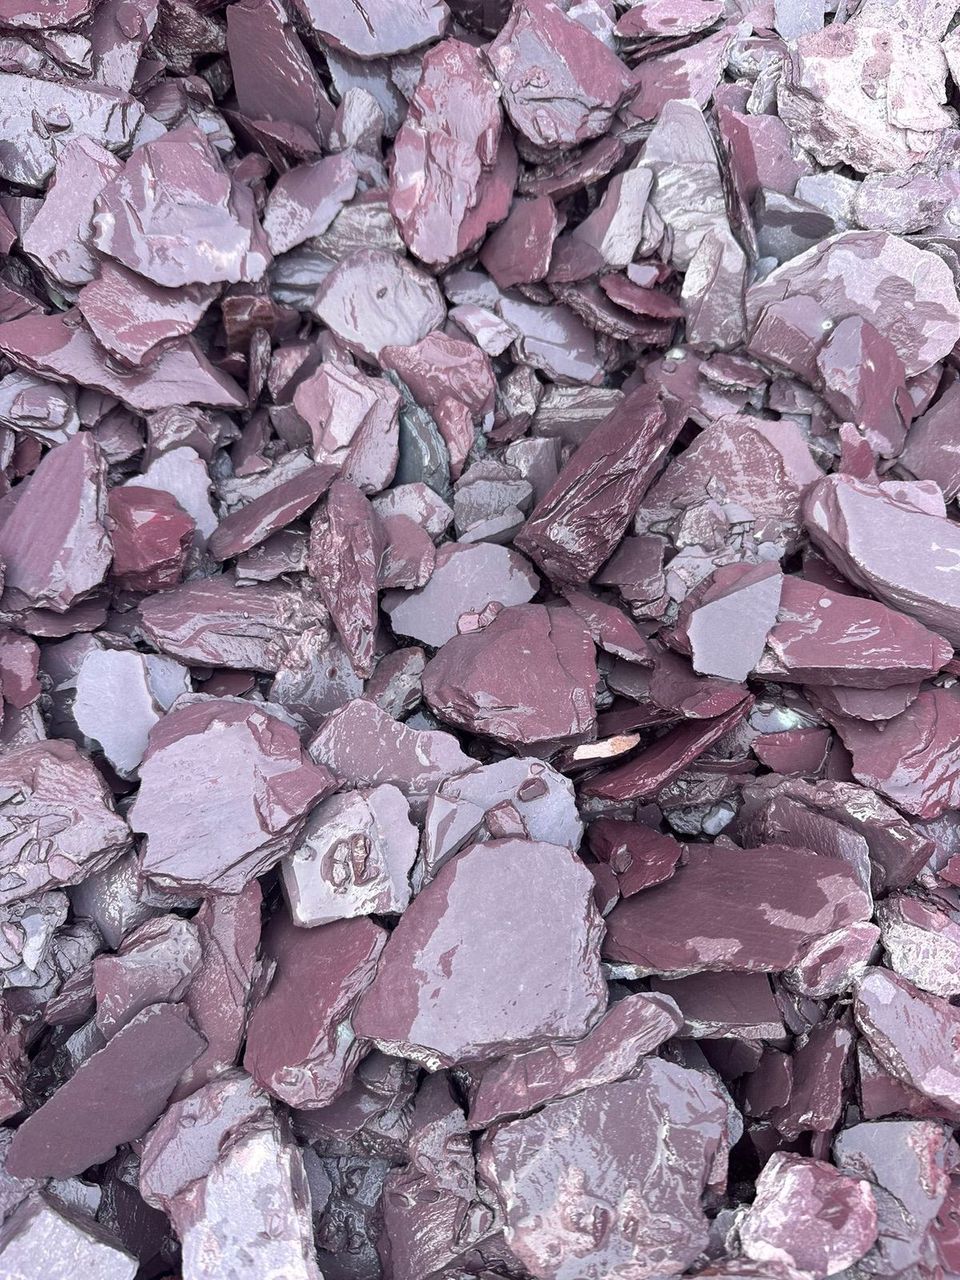 A pile of pink and purple rocks.